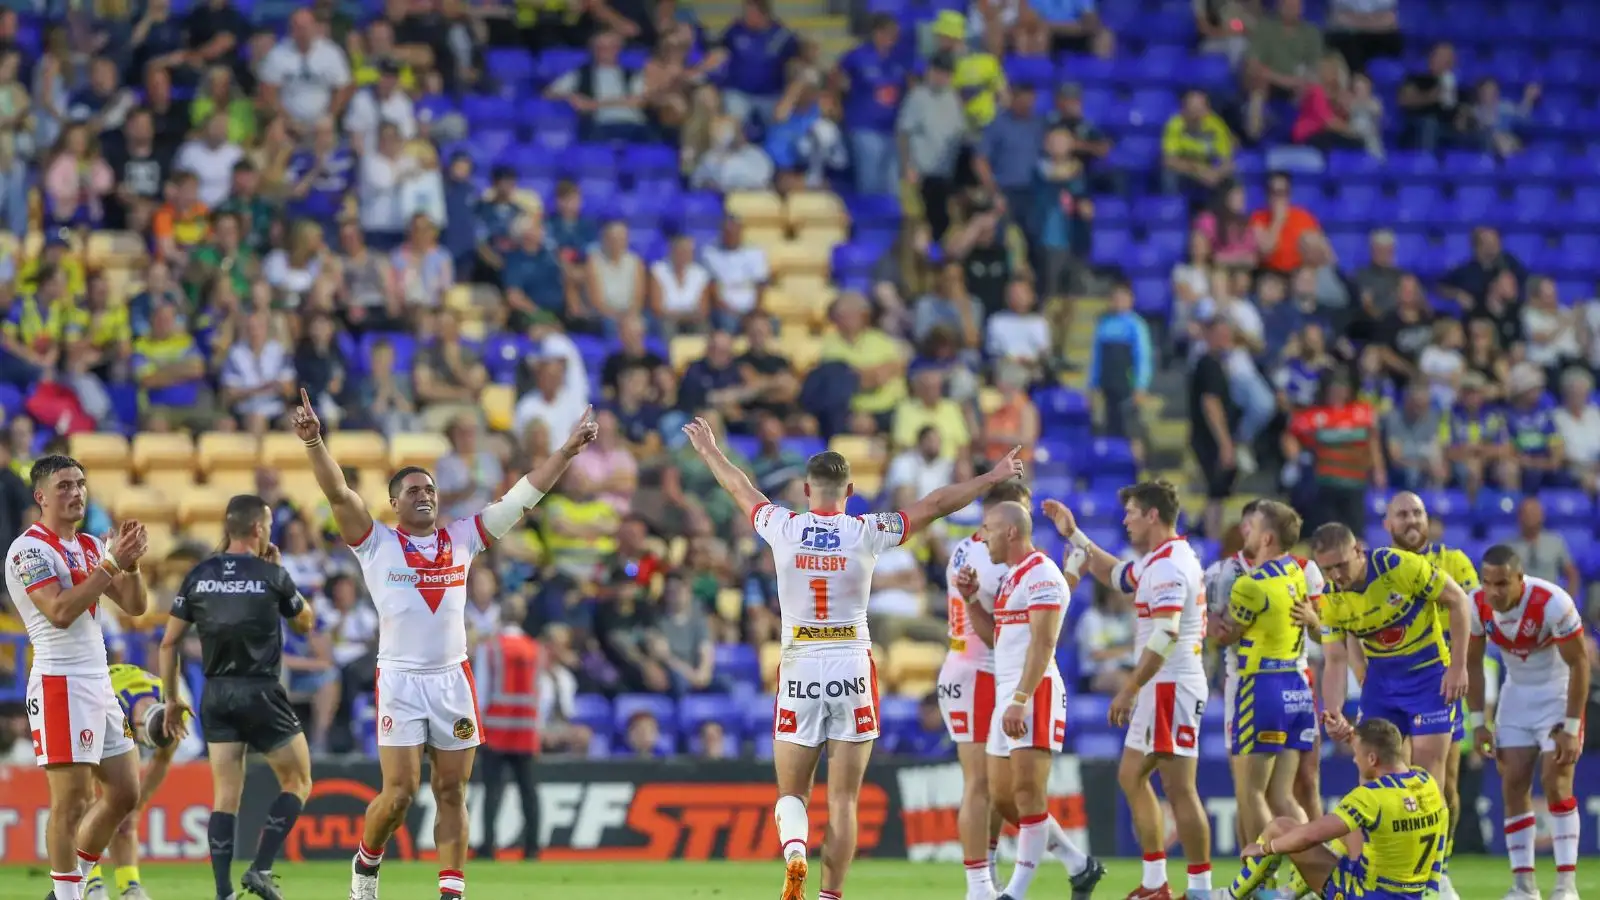 St Helens players celebrate after their Super League Round 18 win over Warrington. Photo by Gareth Evans/News Images.